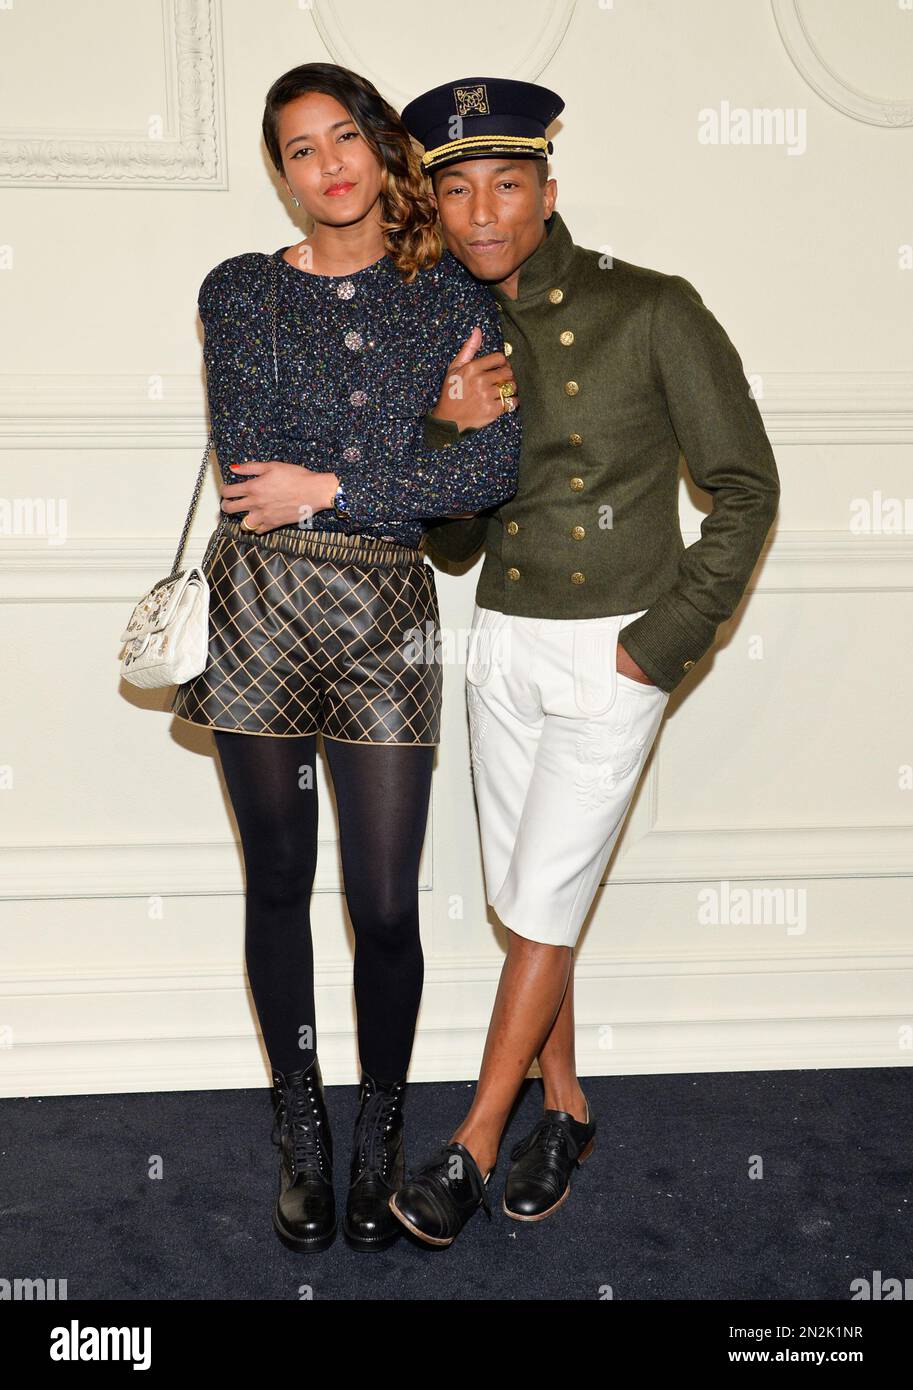 Pharrell Williams and wife Helen Lasichanh arrive at the CHANEL  Paris-Salzburg 2014/15 Metiers d'Art Collection fashion show at the Park  Avenue Armory on Tuesday, March 31, 2015, in New York. (Photo by